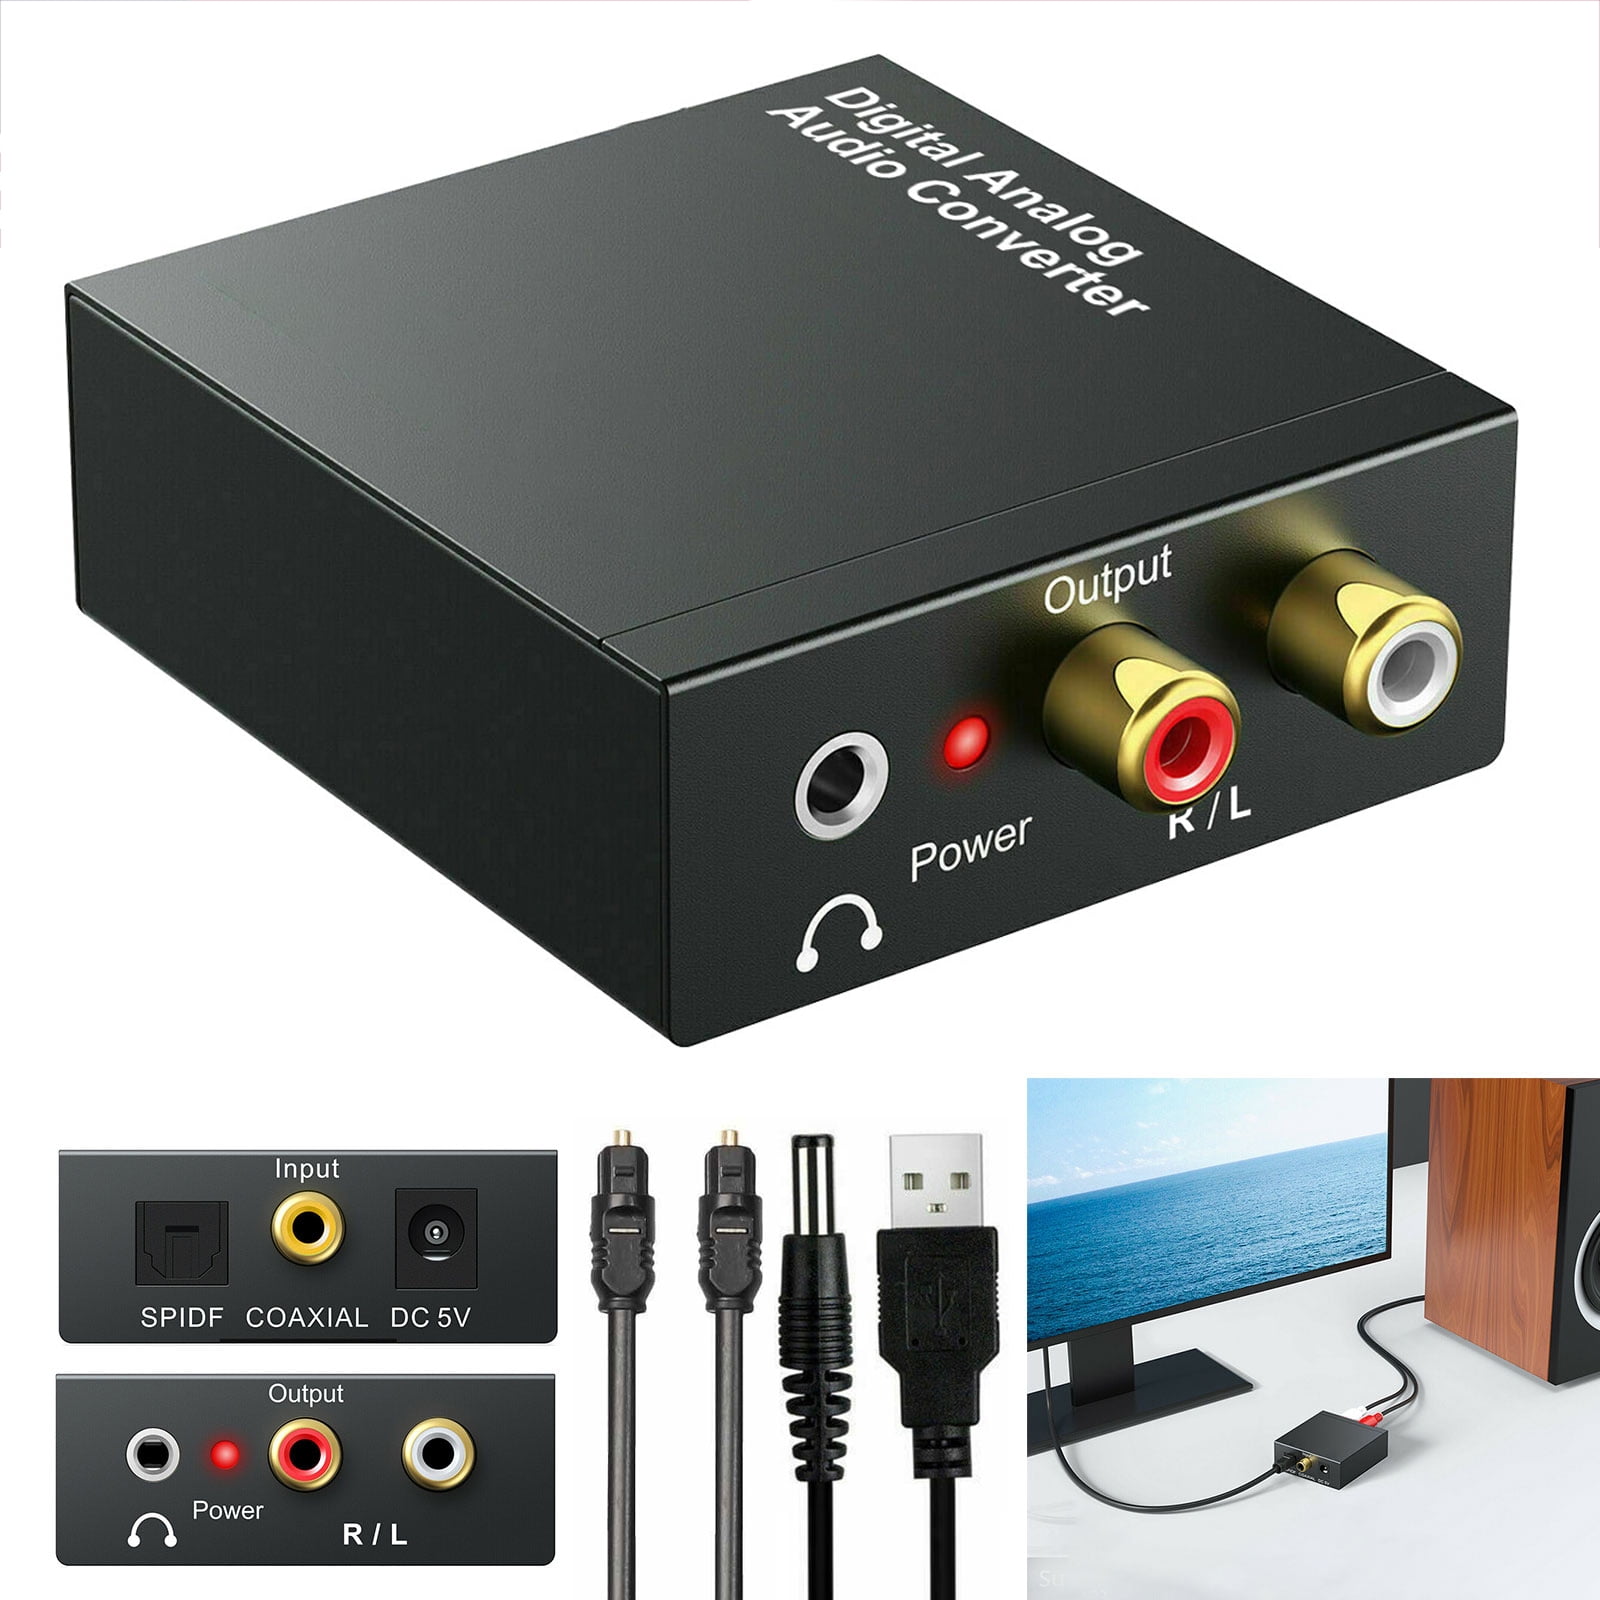 J-Tech Digital Premium Quality Optical SPDIF/Coaxial Digital to RCA L/R  Analog Audio Converter with 3.5mm Jack Support Headphone/Speaker Outputs